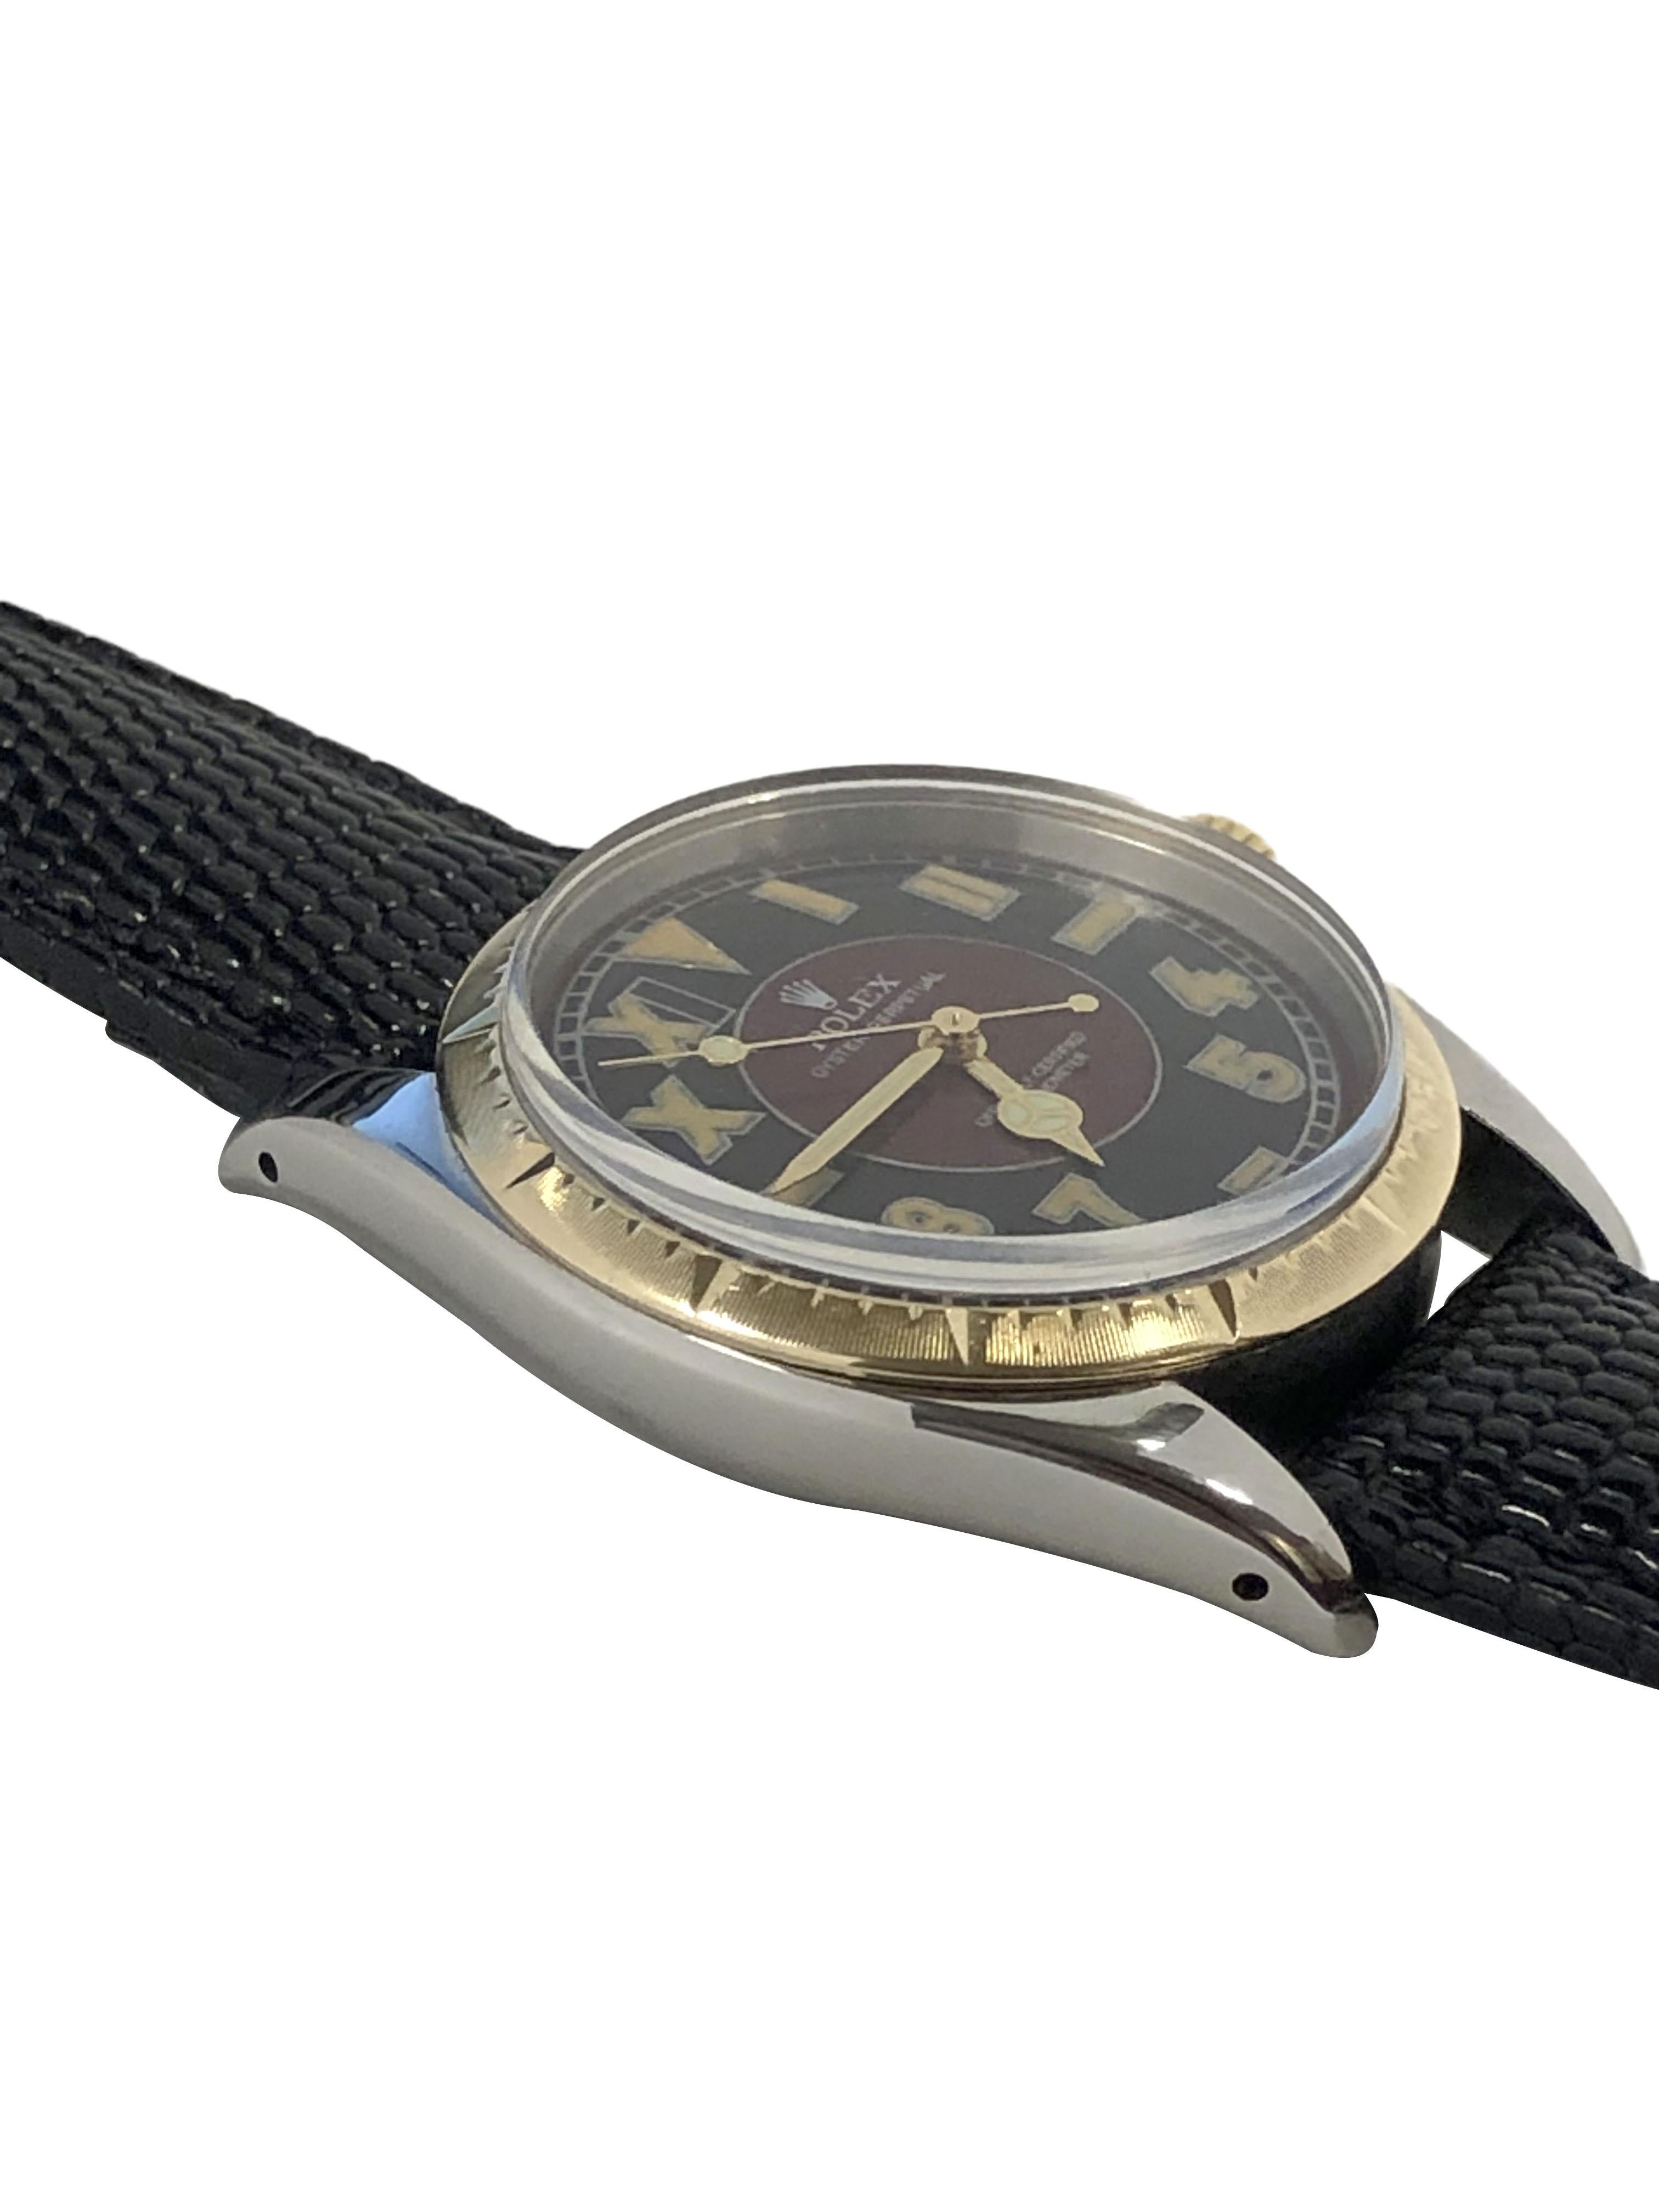 Circa 1966 Rolex Oyster perpetual Reference 6582 Wrist Watch, 34 M.M. 3 piece stainless steel Oyster case with Yellow Gold Zephyre Bezel and Gold Crown. Caliber 1030, Automatic, self winding movement, Custom refinished two color California Dial with